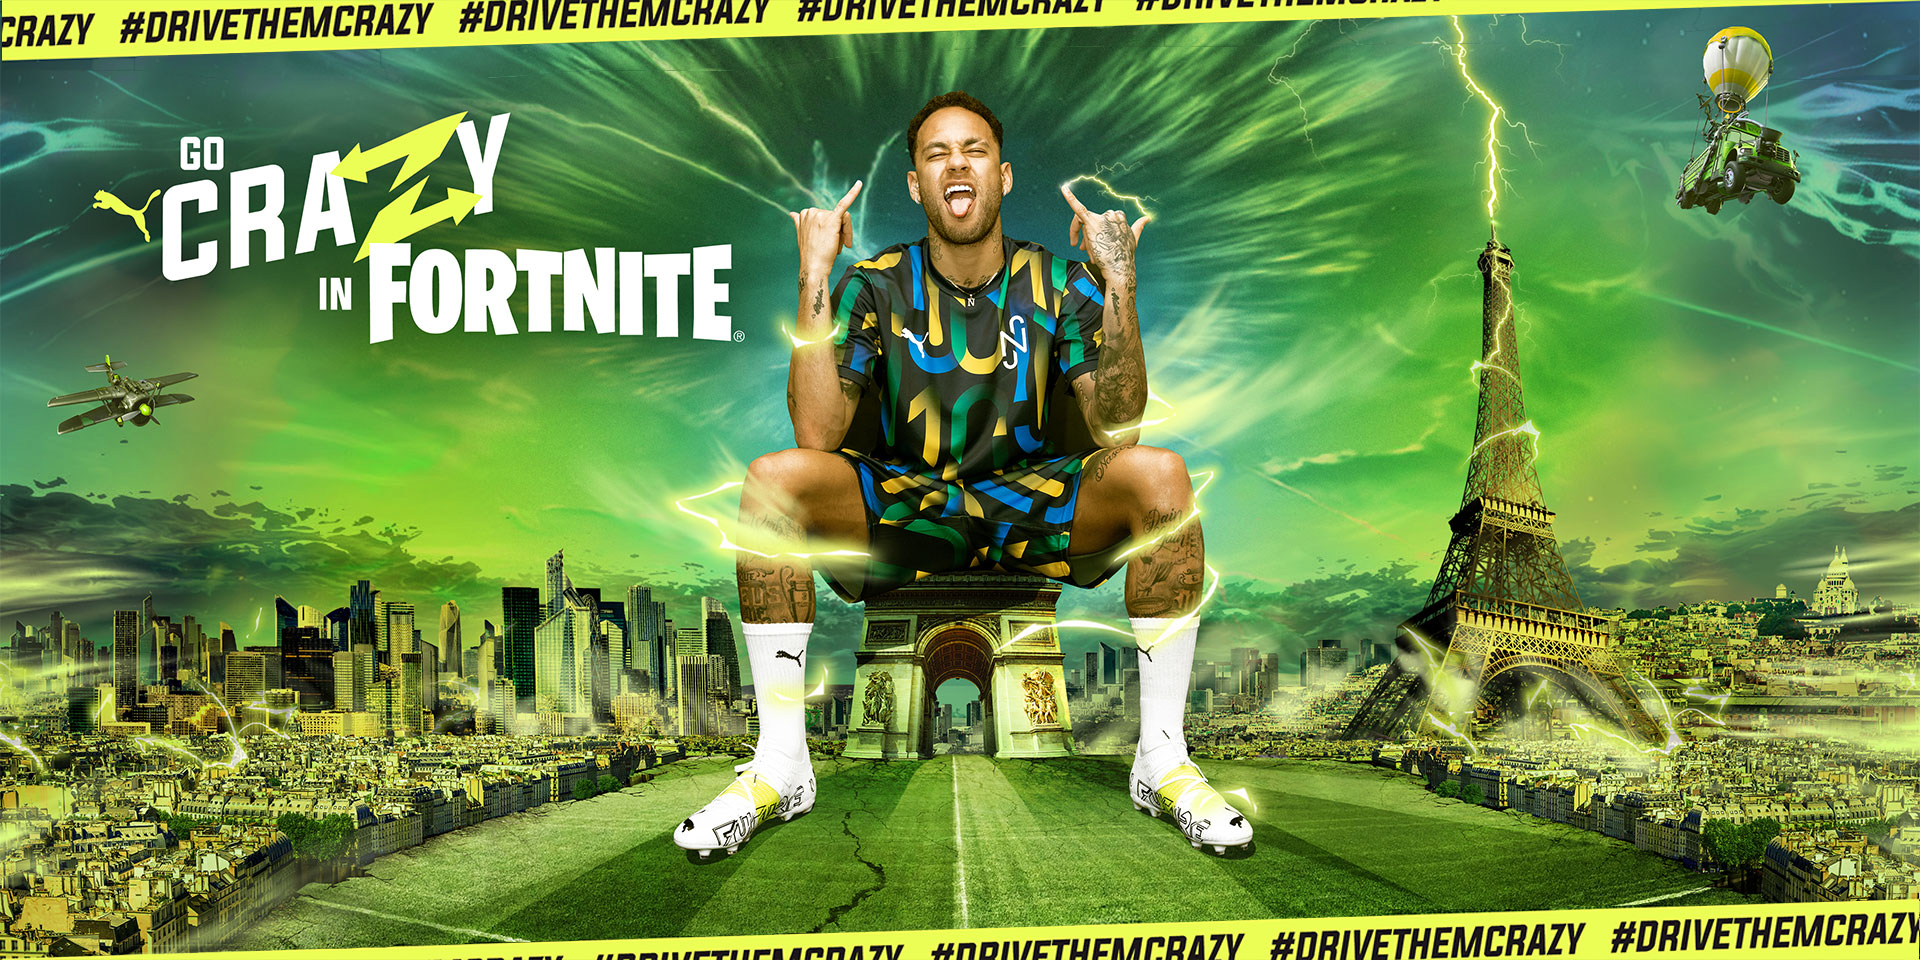 Neymar joins up with Fortnite in latest PUMA Partnership